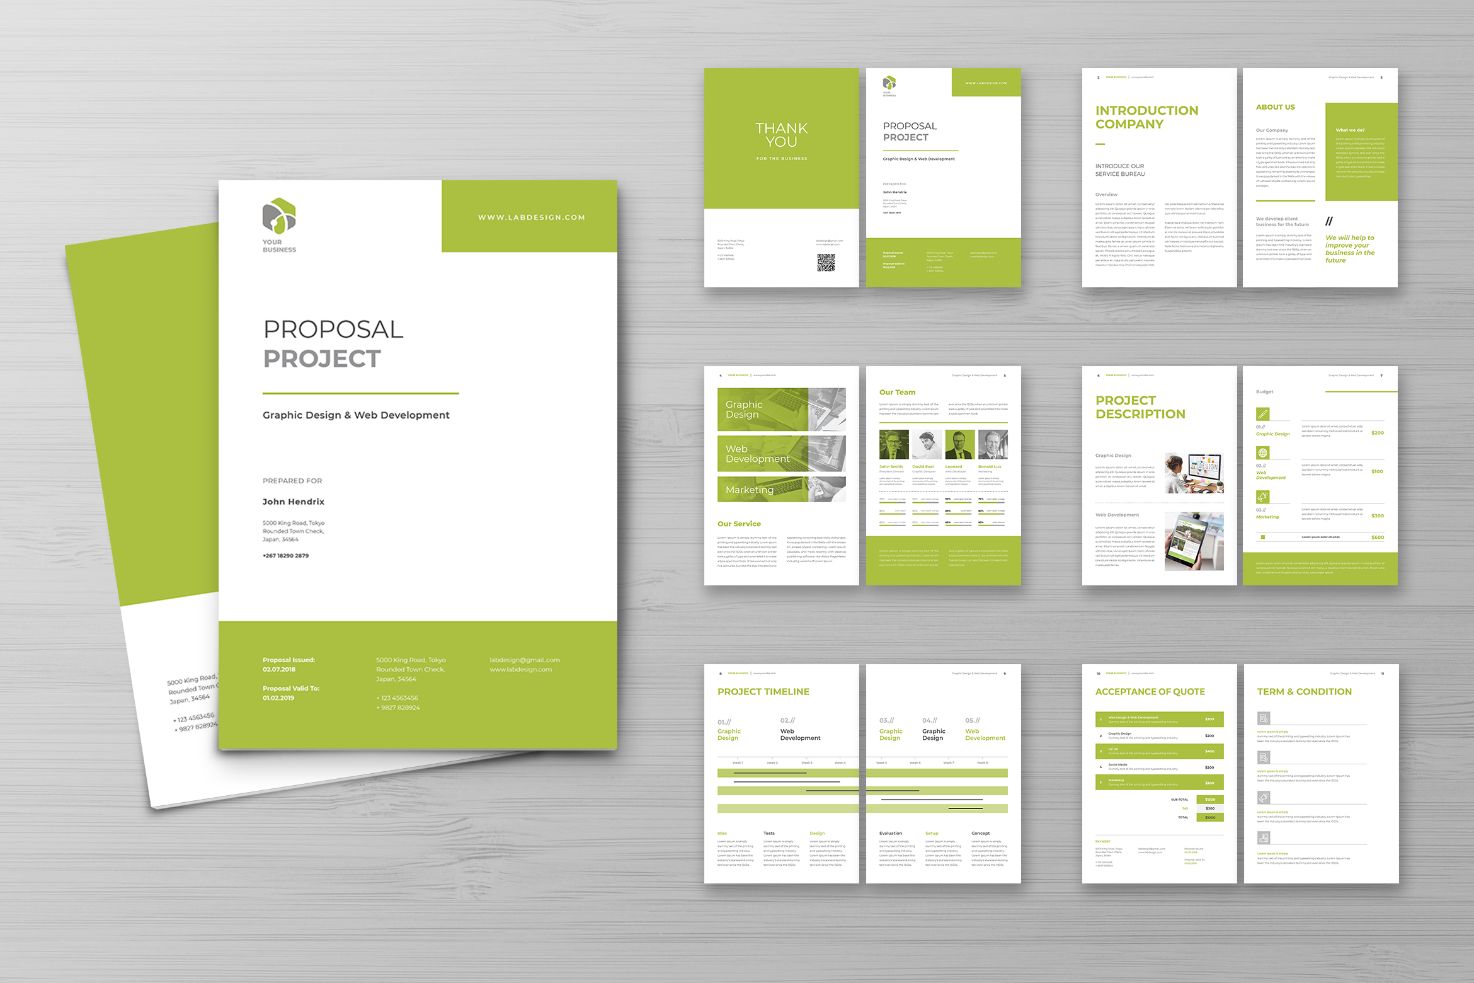 Proposal Graphic Design Project - Corporate Identity Template